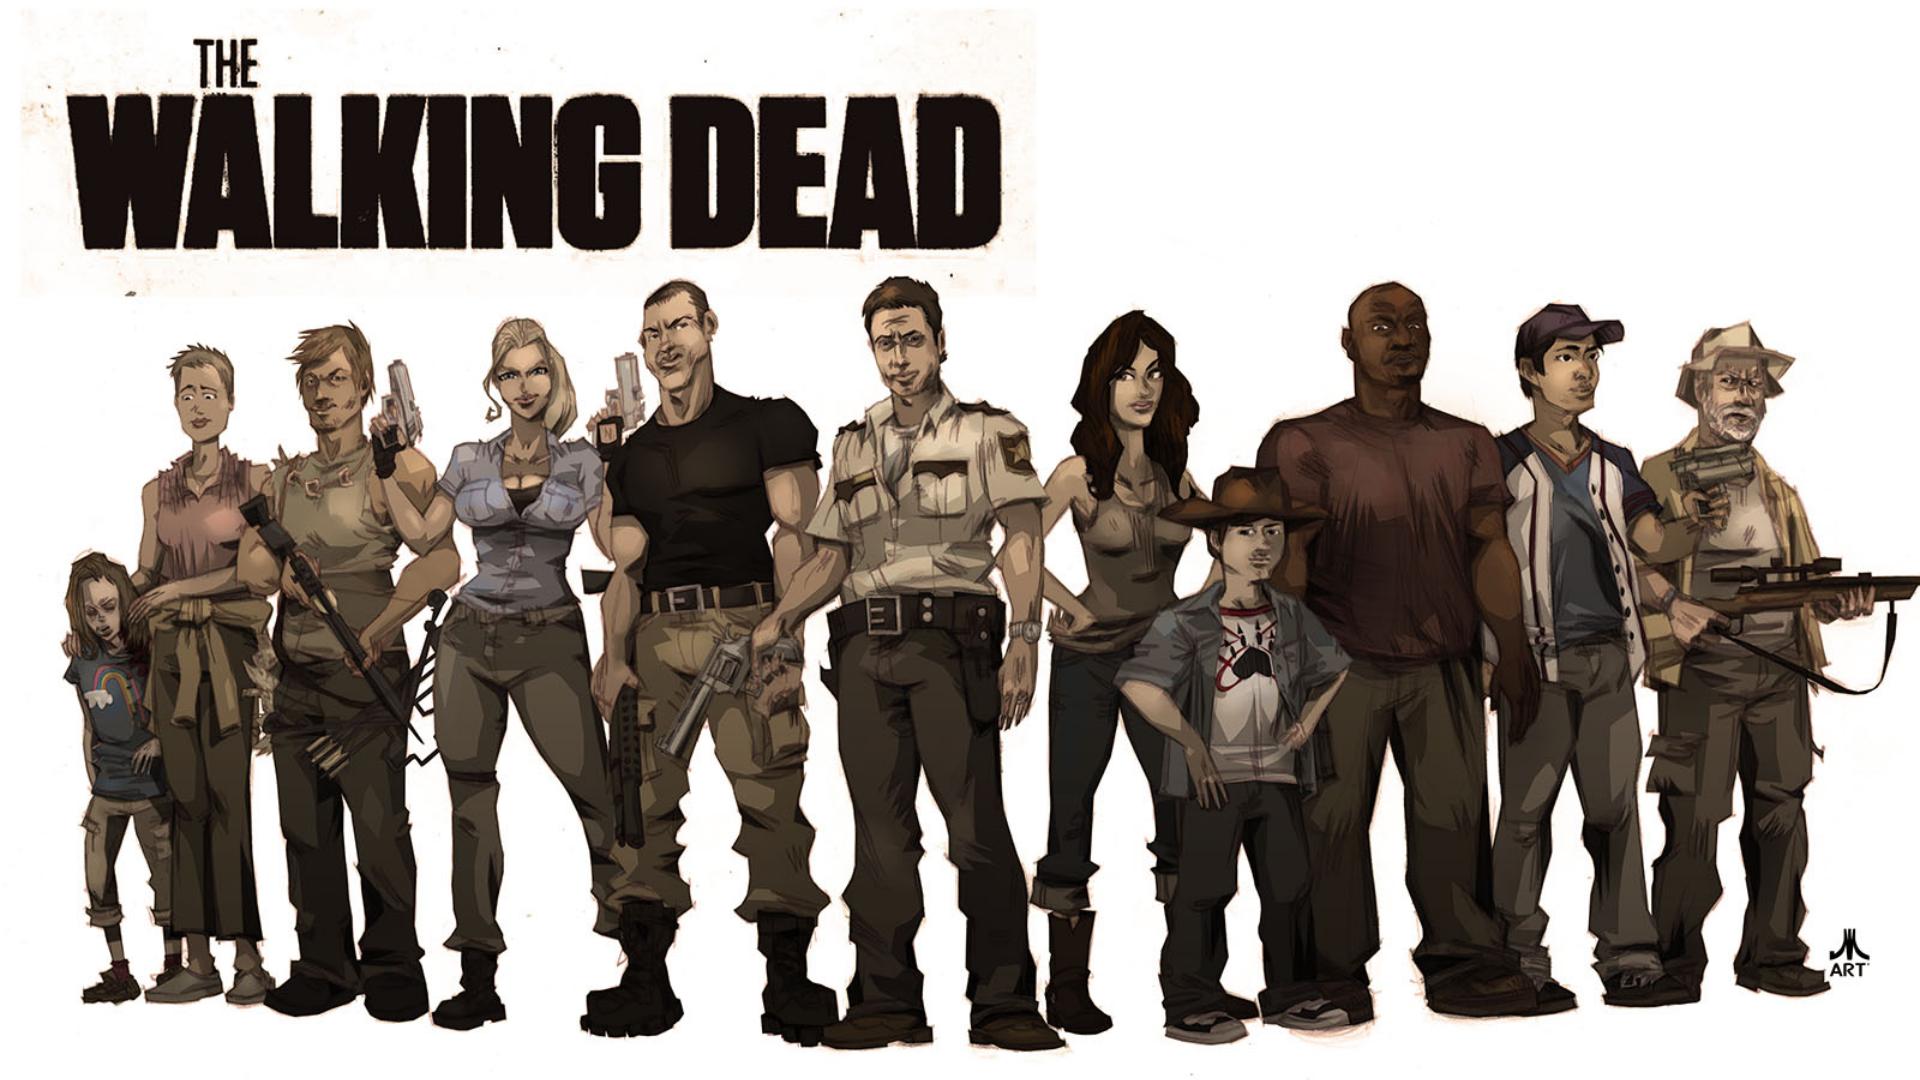 The Walking Dead Wallpaper High Definition Quality